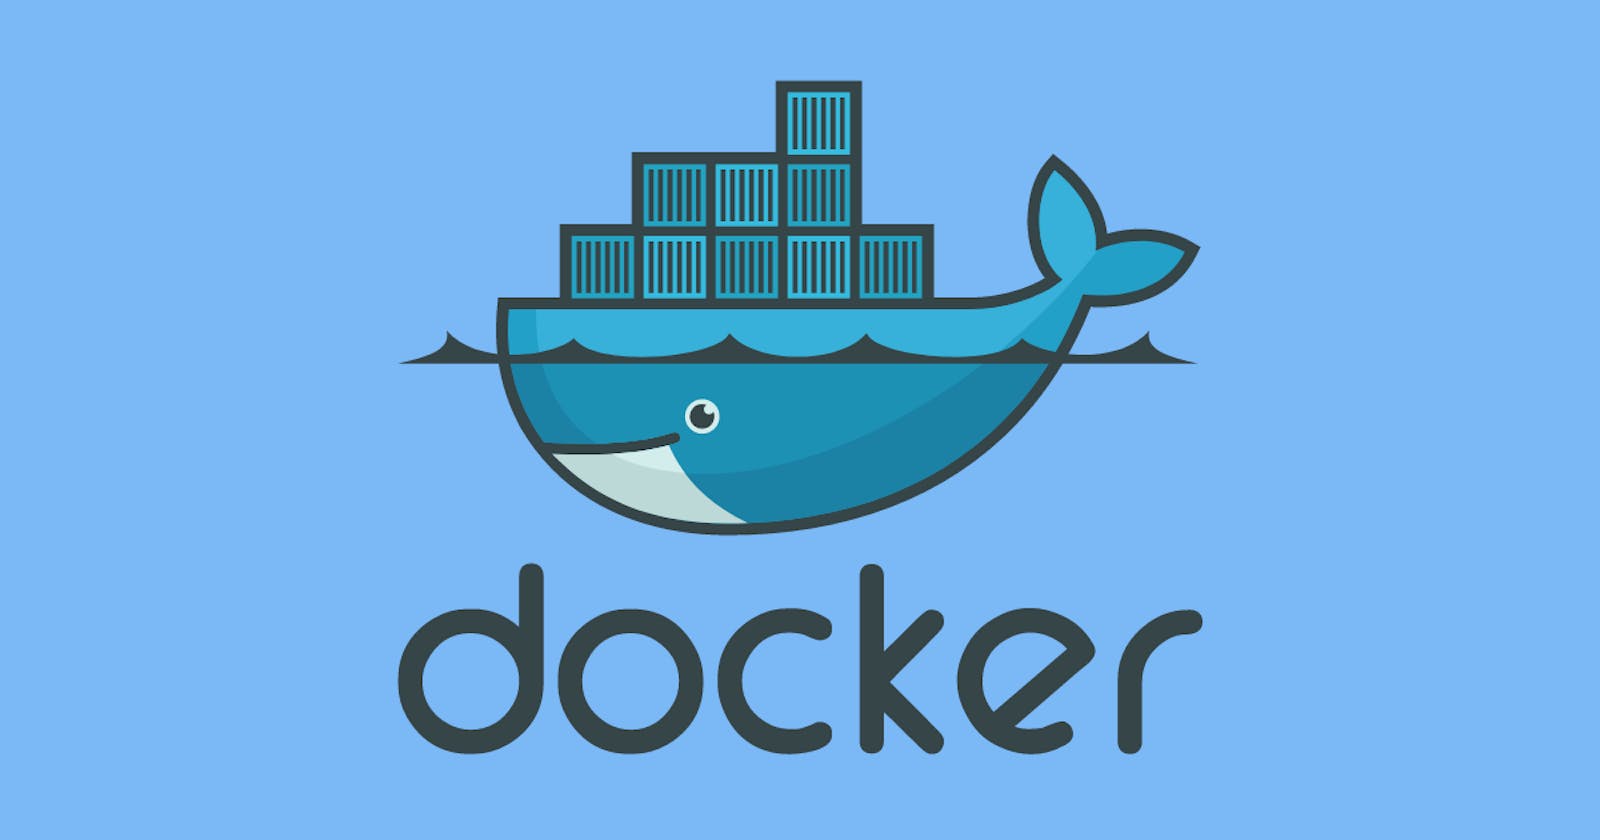 Why and What is Docker?